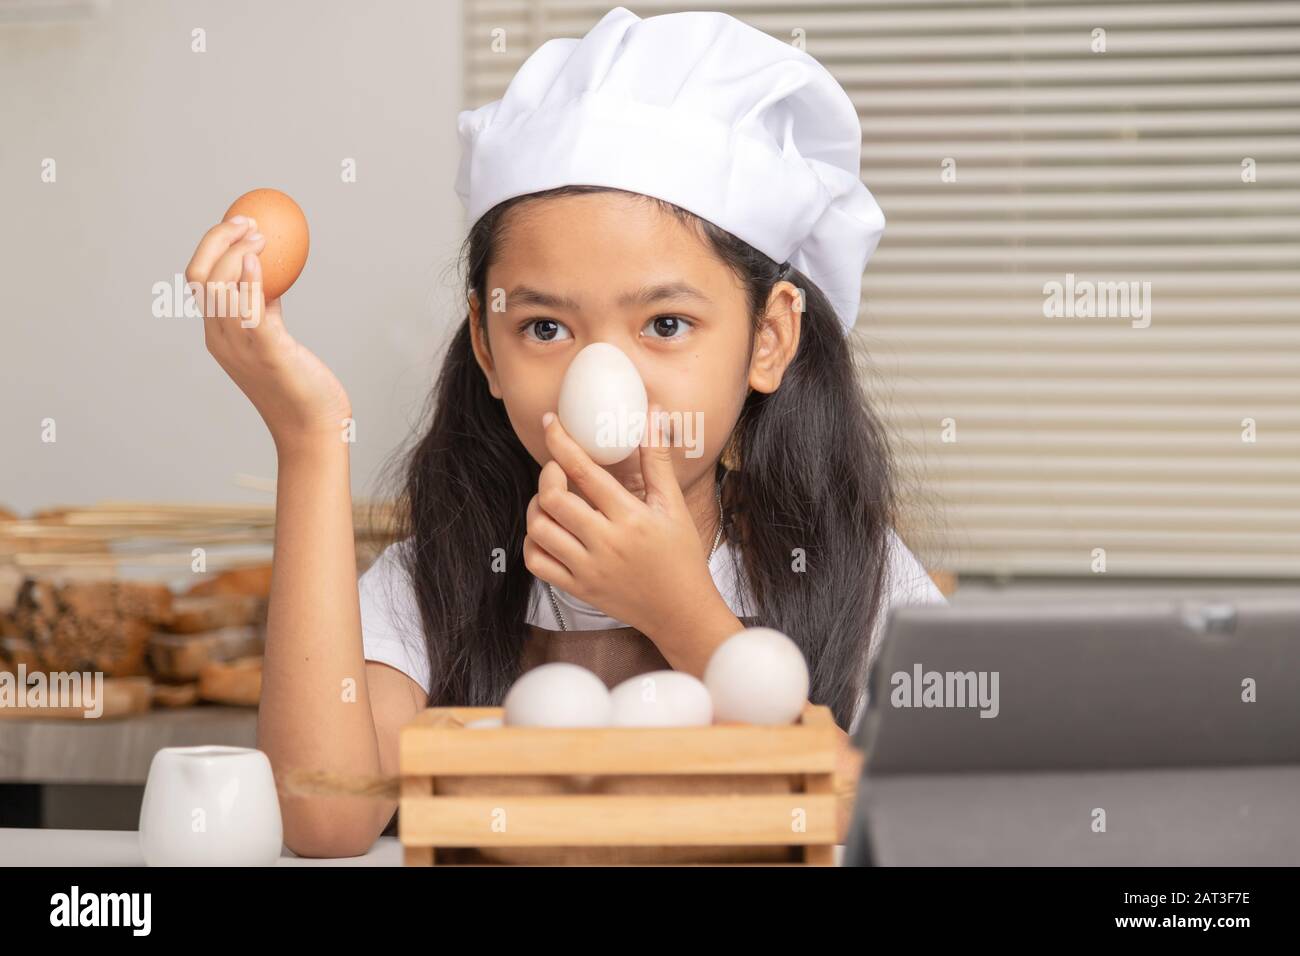 A little Asian girl wearing a white chef hat holding eggs and select a duck egg placed on her nose on a white cooking table in the kitchen. Stock Photo